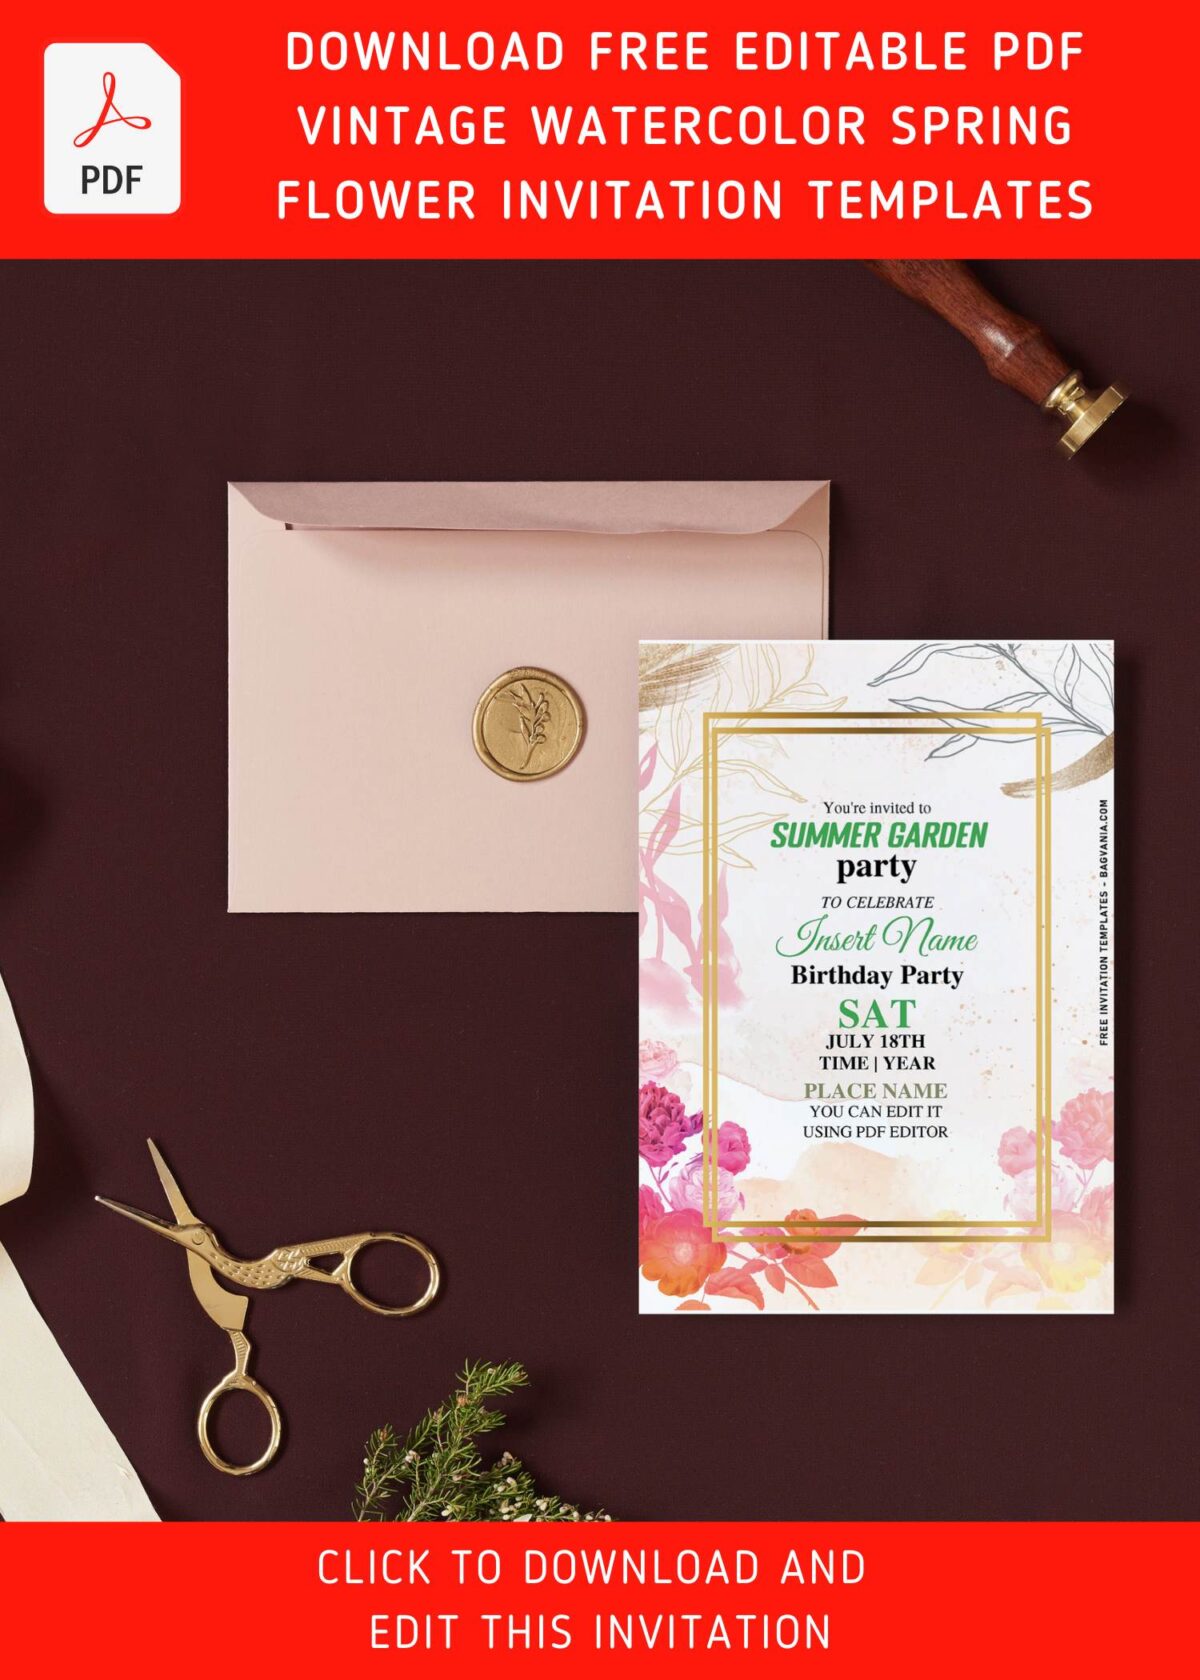 (Free Editable PDF) Vintage Gold And Watercolor Spring Flower Birthday Invitation Templates with gold foiled geometric frame